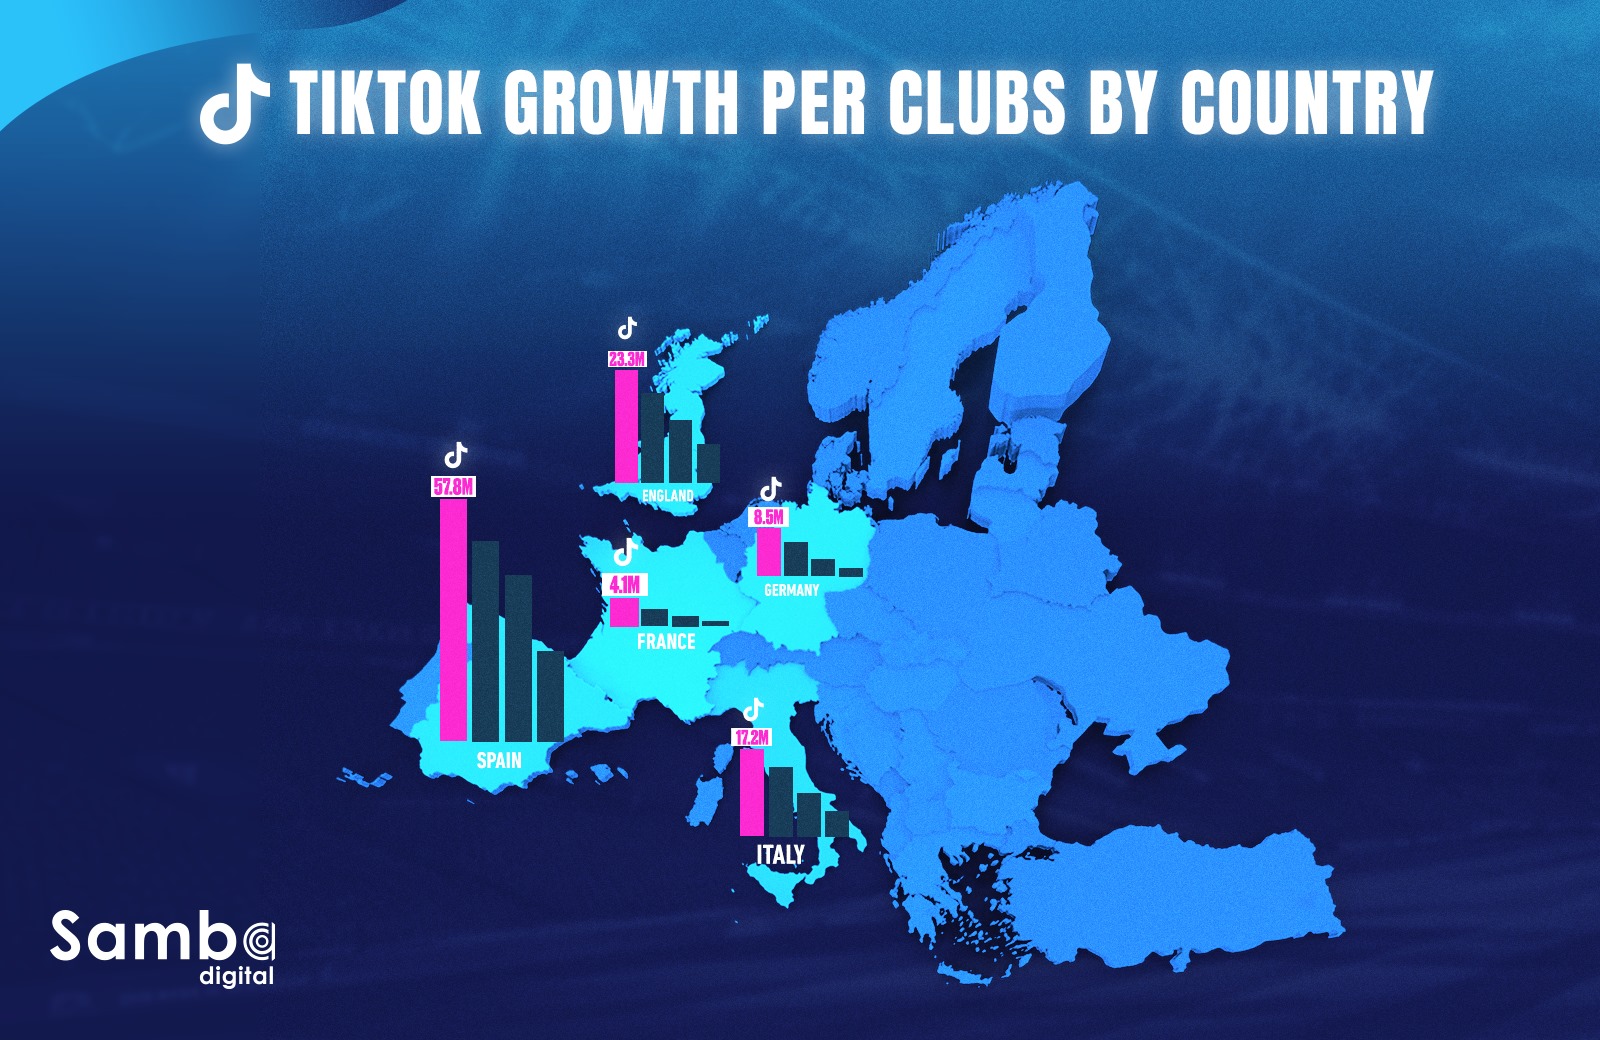 TikTok Establishes Itself as the Fastest-Growing Social Network in European National Leagues